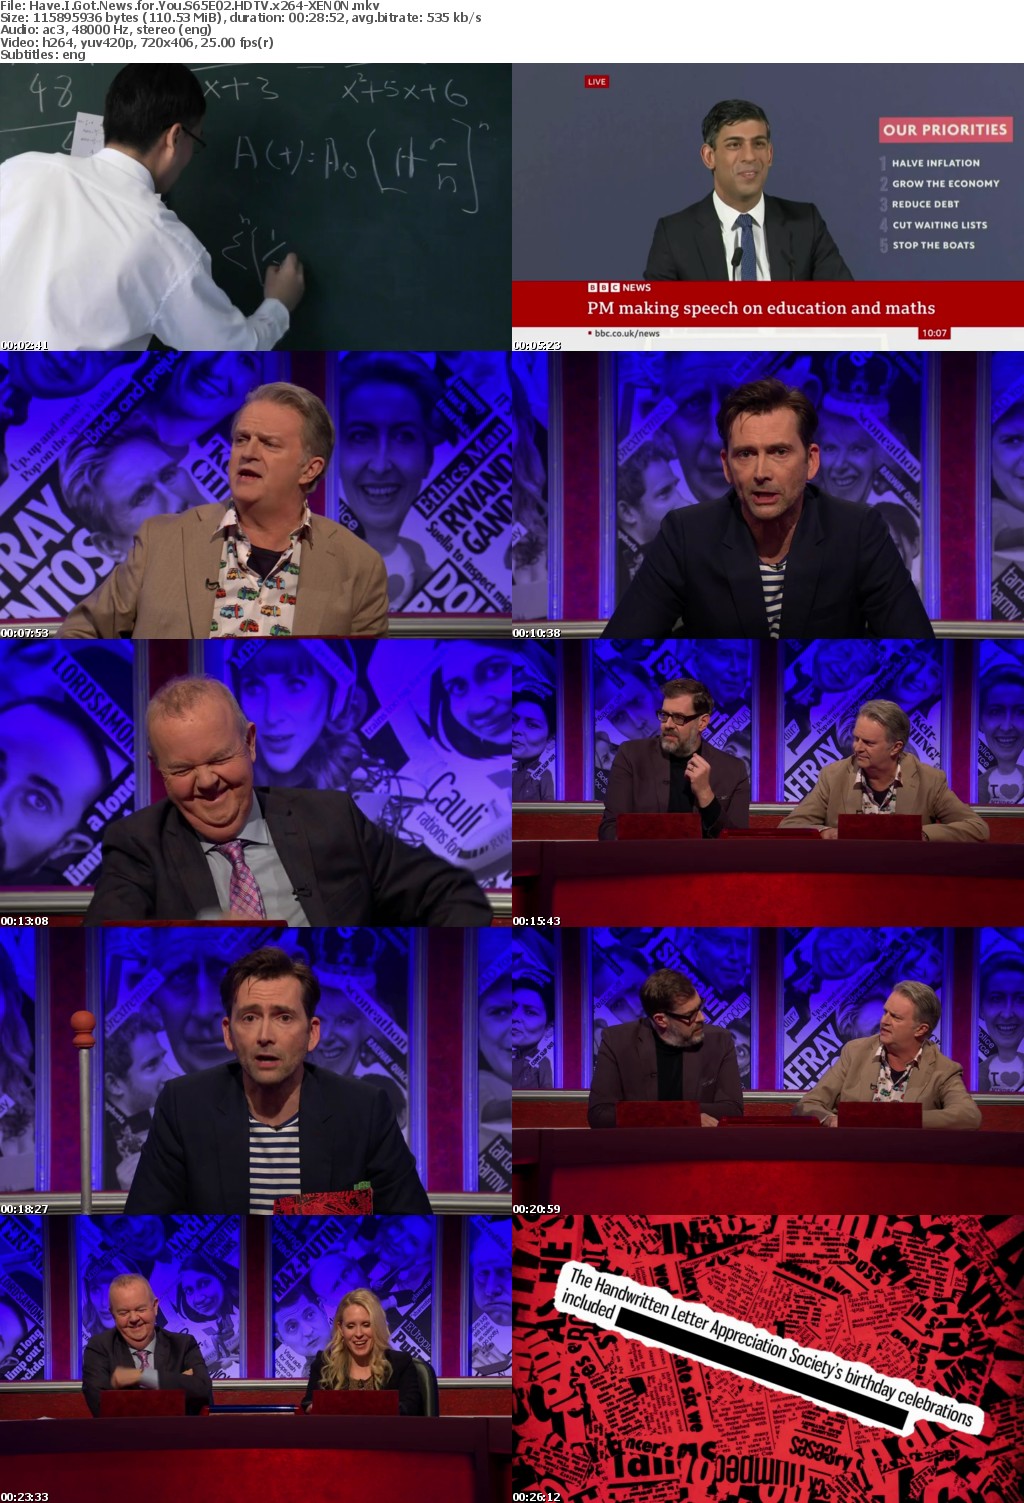 Have I Got News for You S65E02 HDTV x264-XEN0N